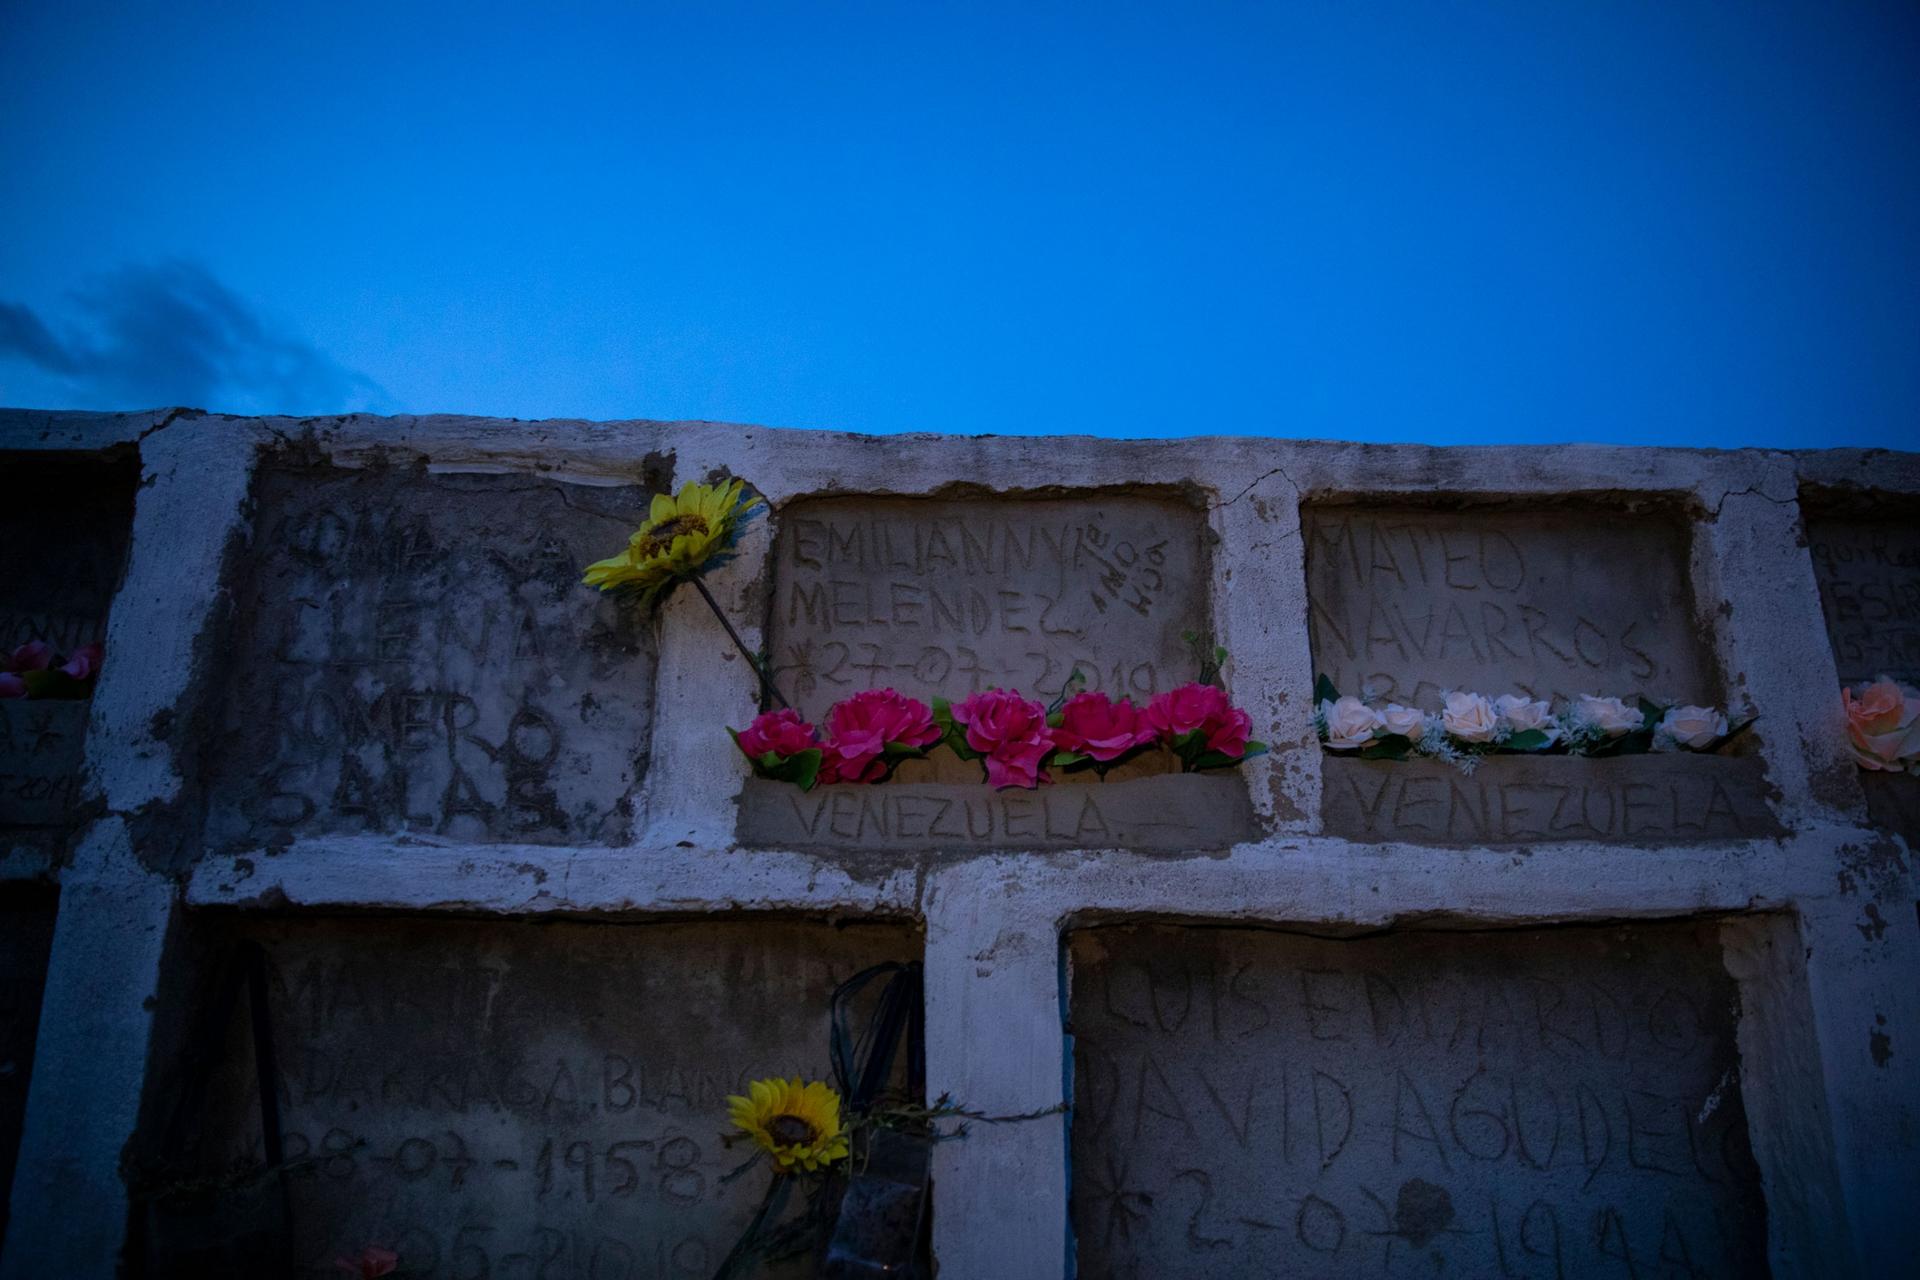 Two rows of graves are shown stacked on top of each other with several pink and yellow flowers.